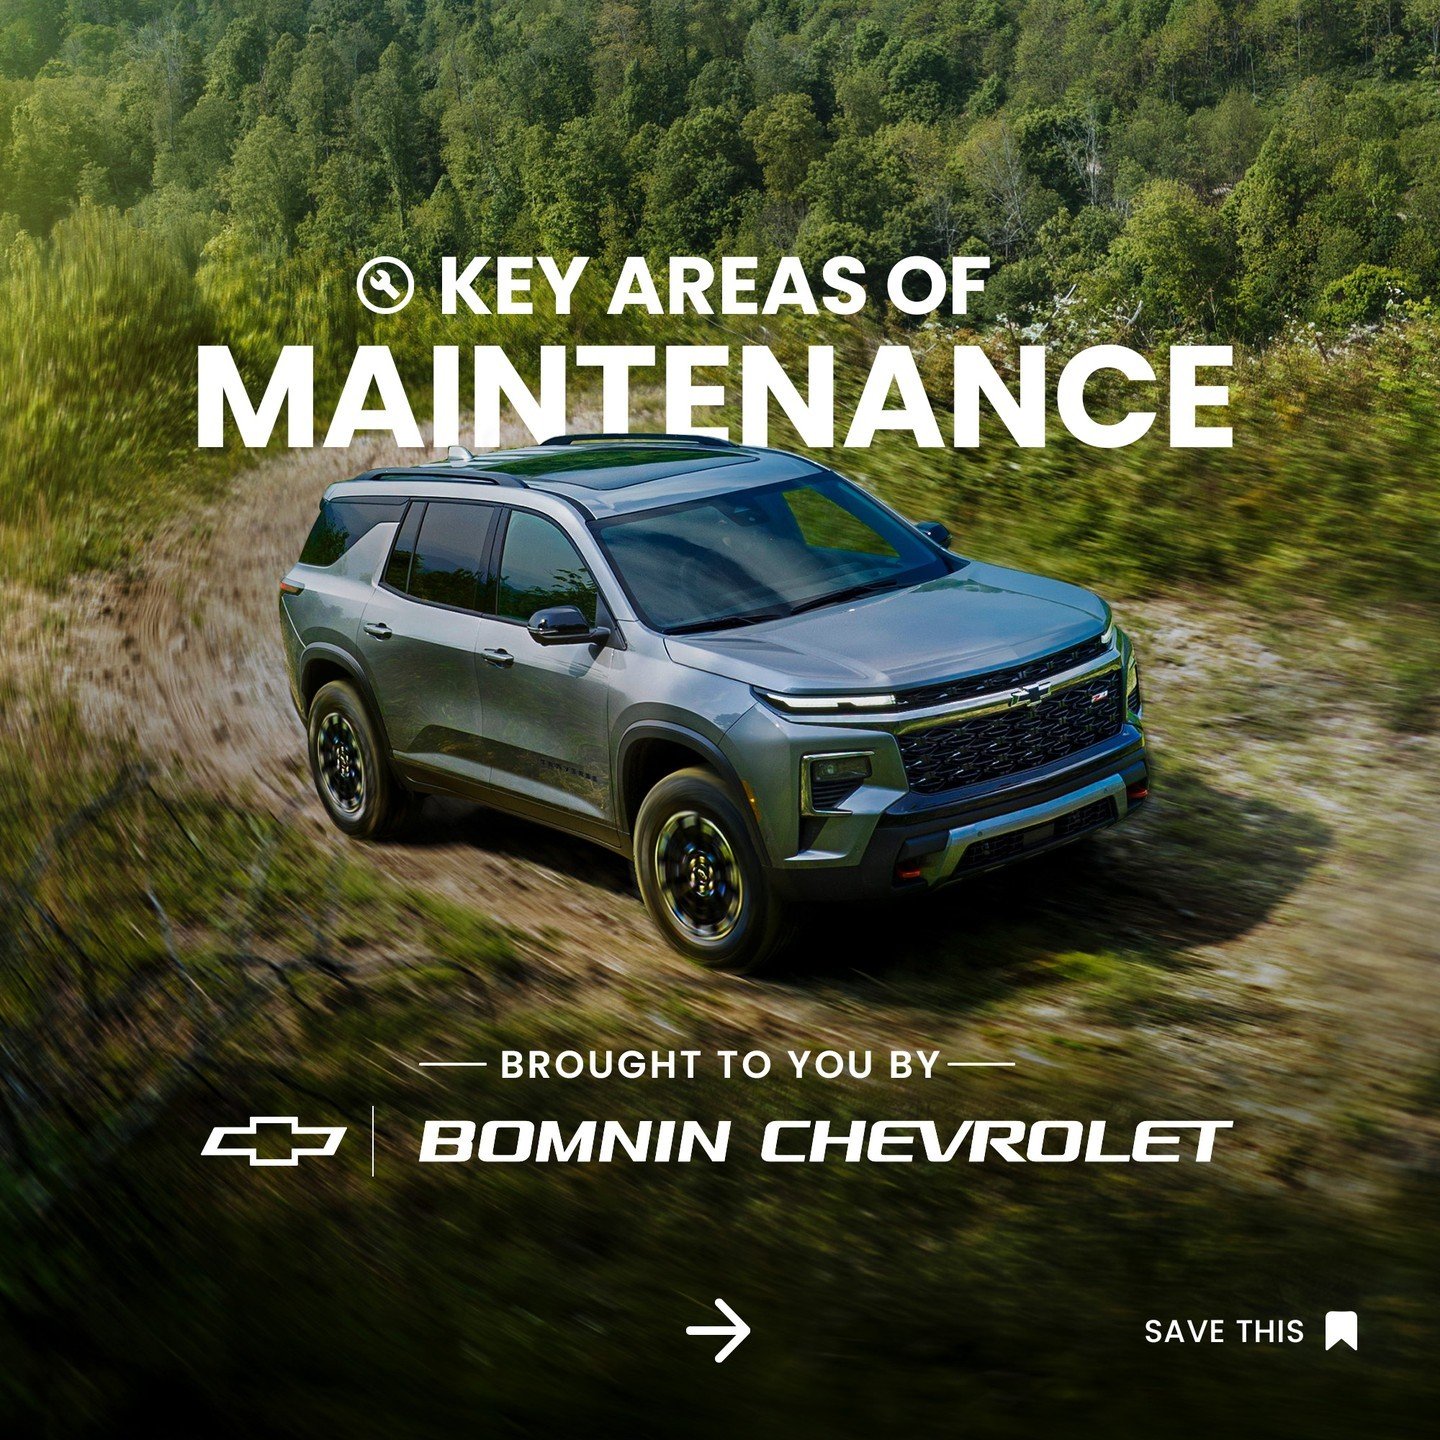 Click the link in our bio to schedule your service appointment today! Let our expert technicians take care of your vehicle! 🛠️✨

Staying on top of maintenance is crucial for optimal performance and safety.
 
#ChevroletMaintenance #ScheduleService #B